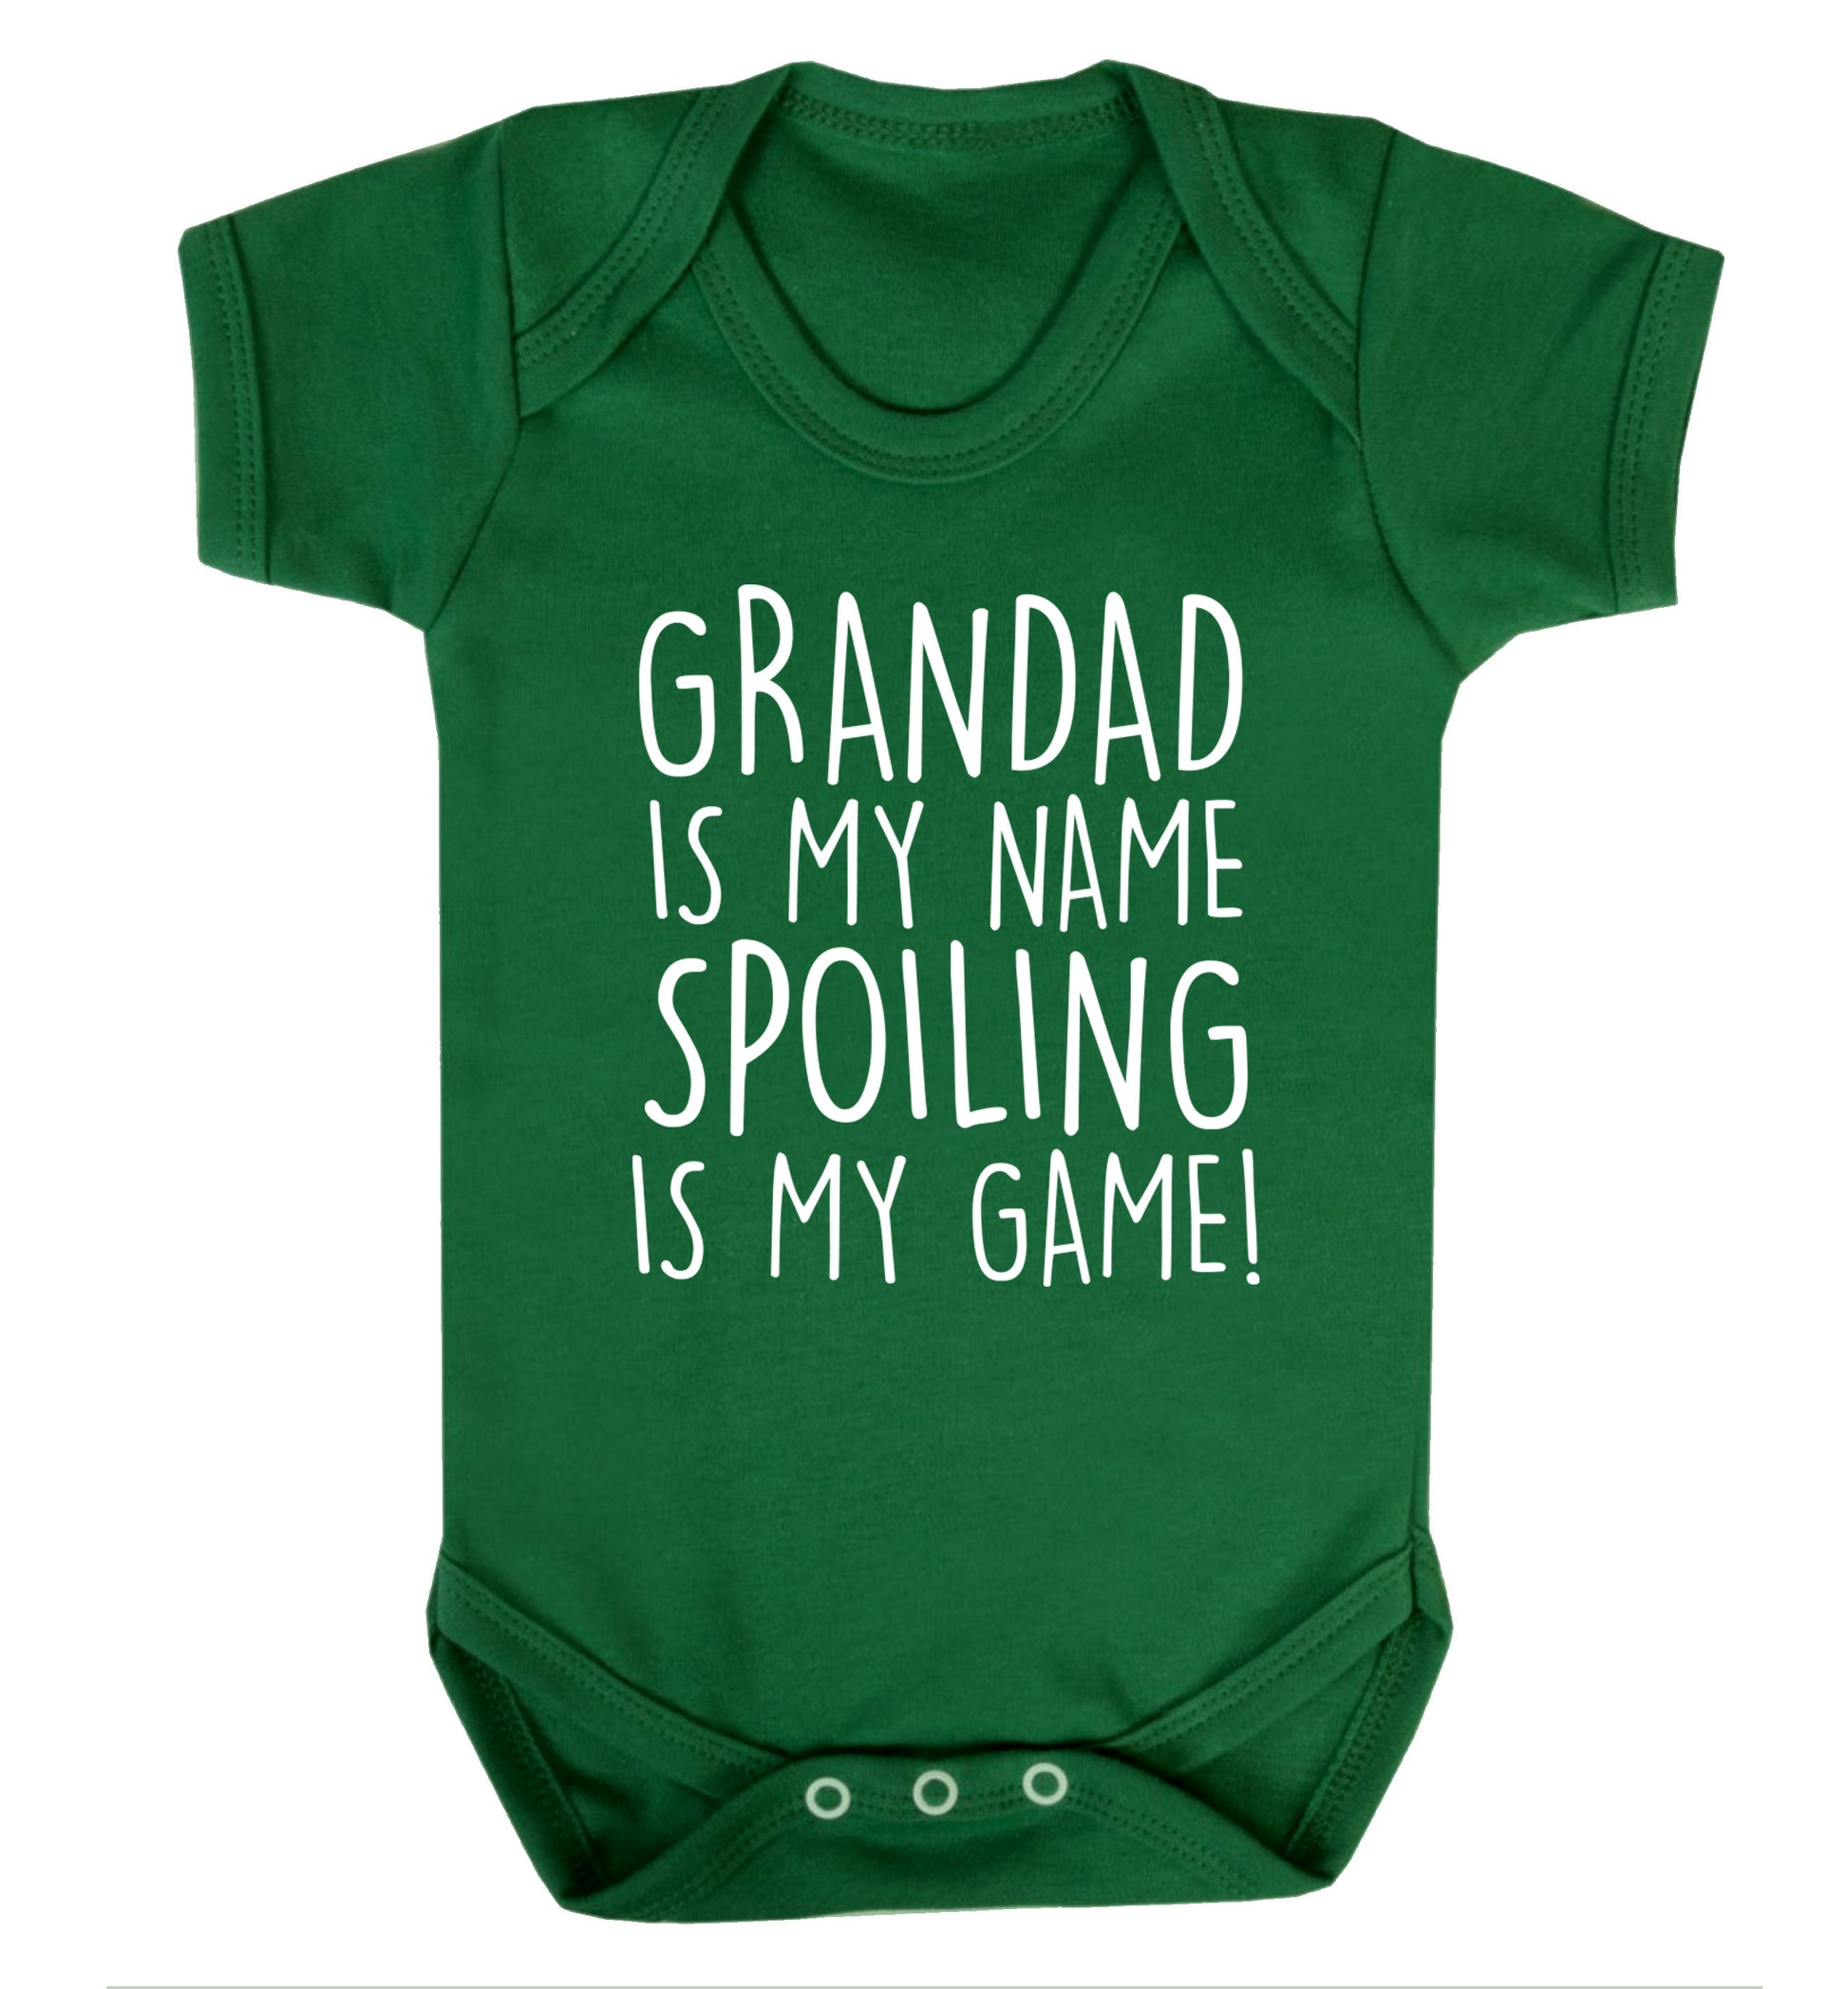 Grandad is my name, spoiling is my game Baby Vest green 18-24 months